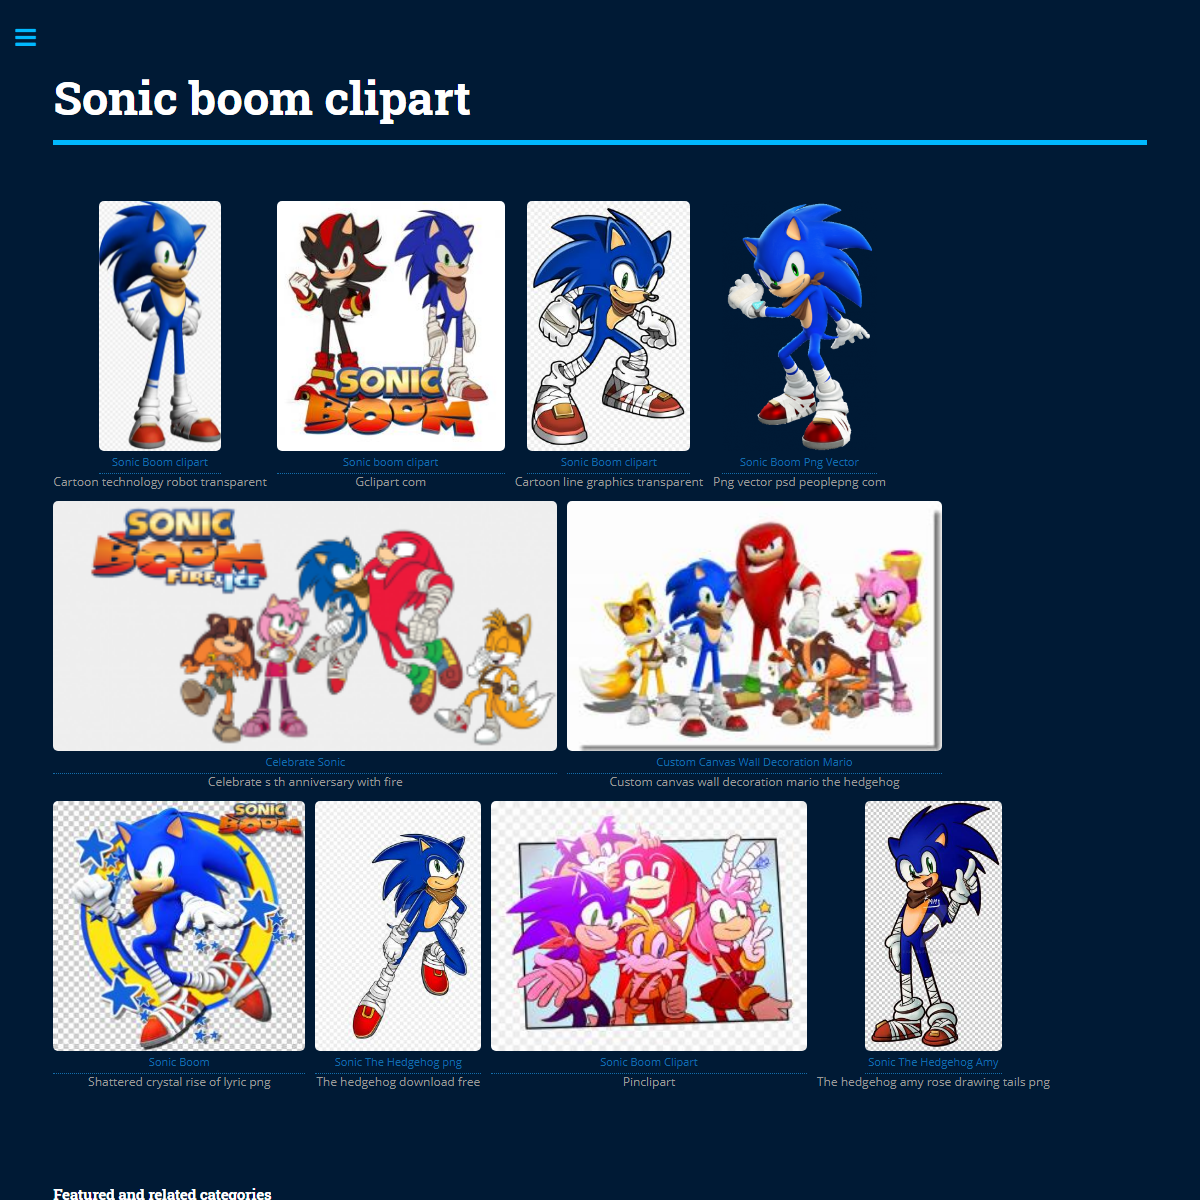 A complete backup of https://clipartart.com/categories/sonic-boom-clipart.html